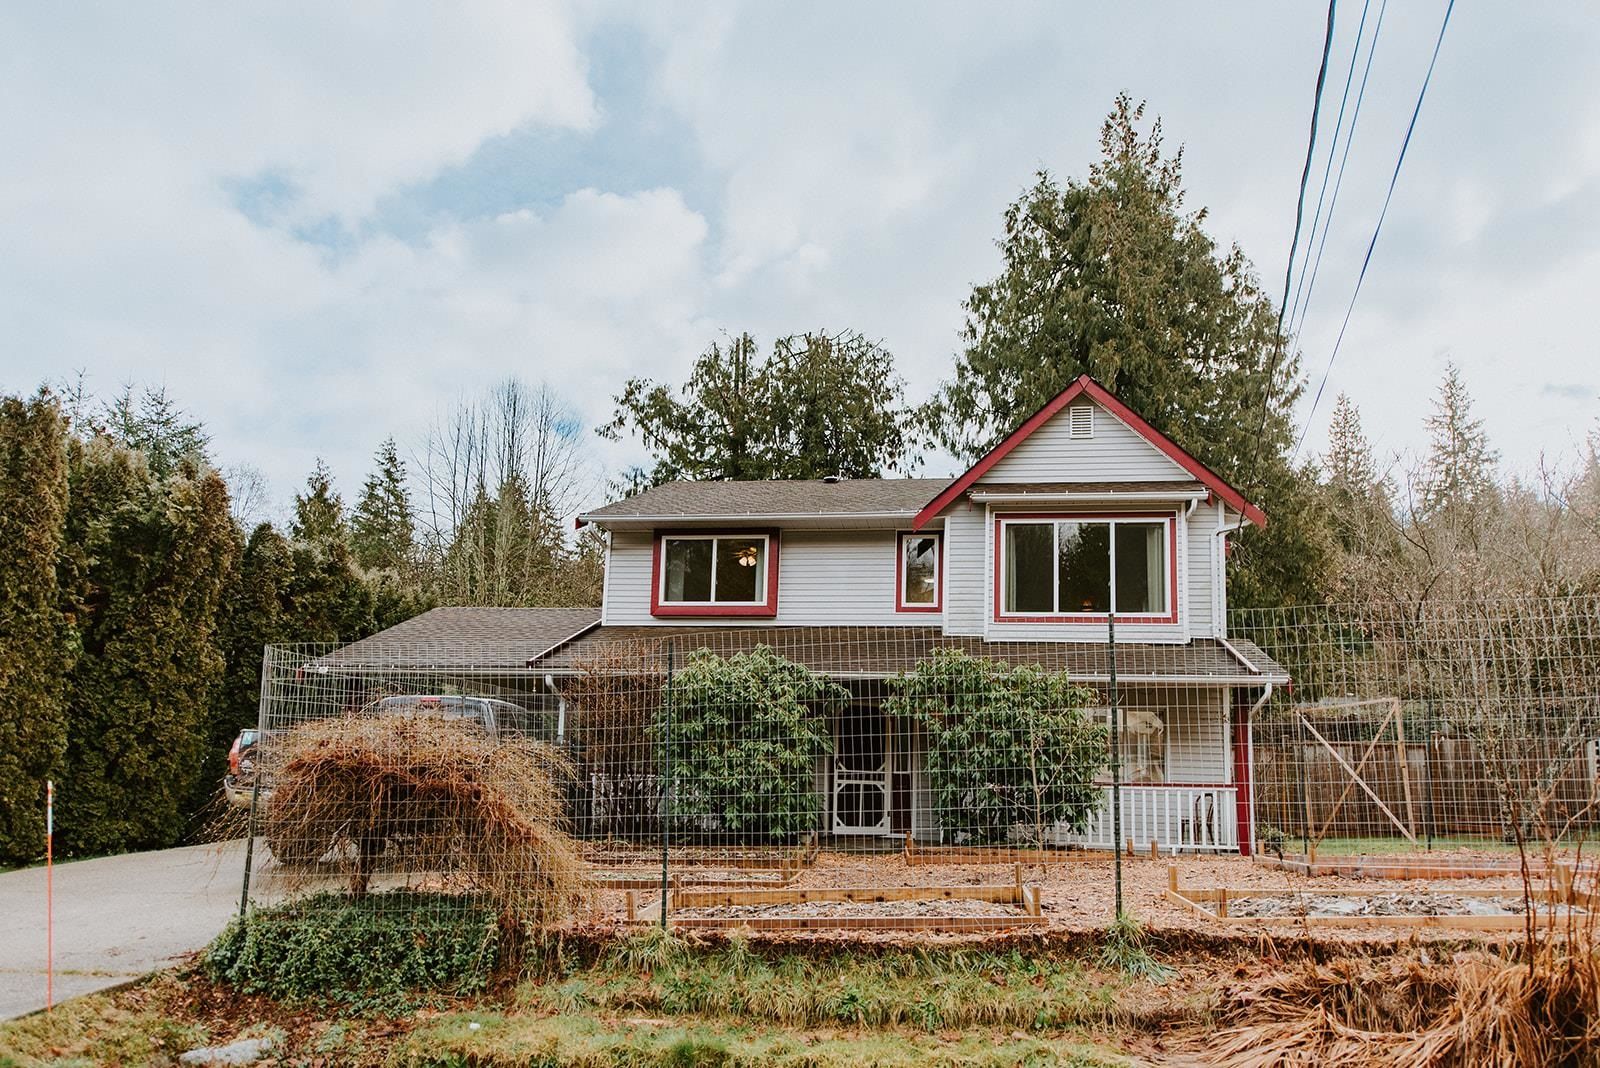 Open House. Open House on Saturday, February 25, 2023 11:00AM - 1:00PM
Join us to tour this lovely suited home in peaceful Langdale. Just minutes to ferries & local school.